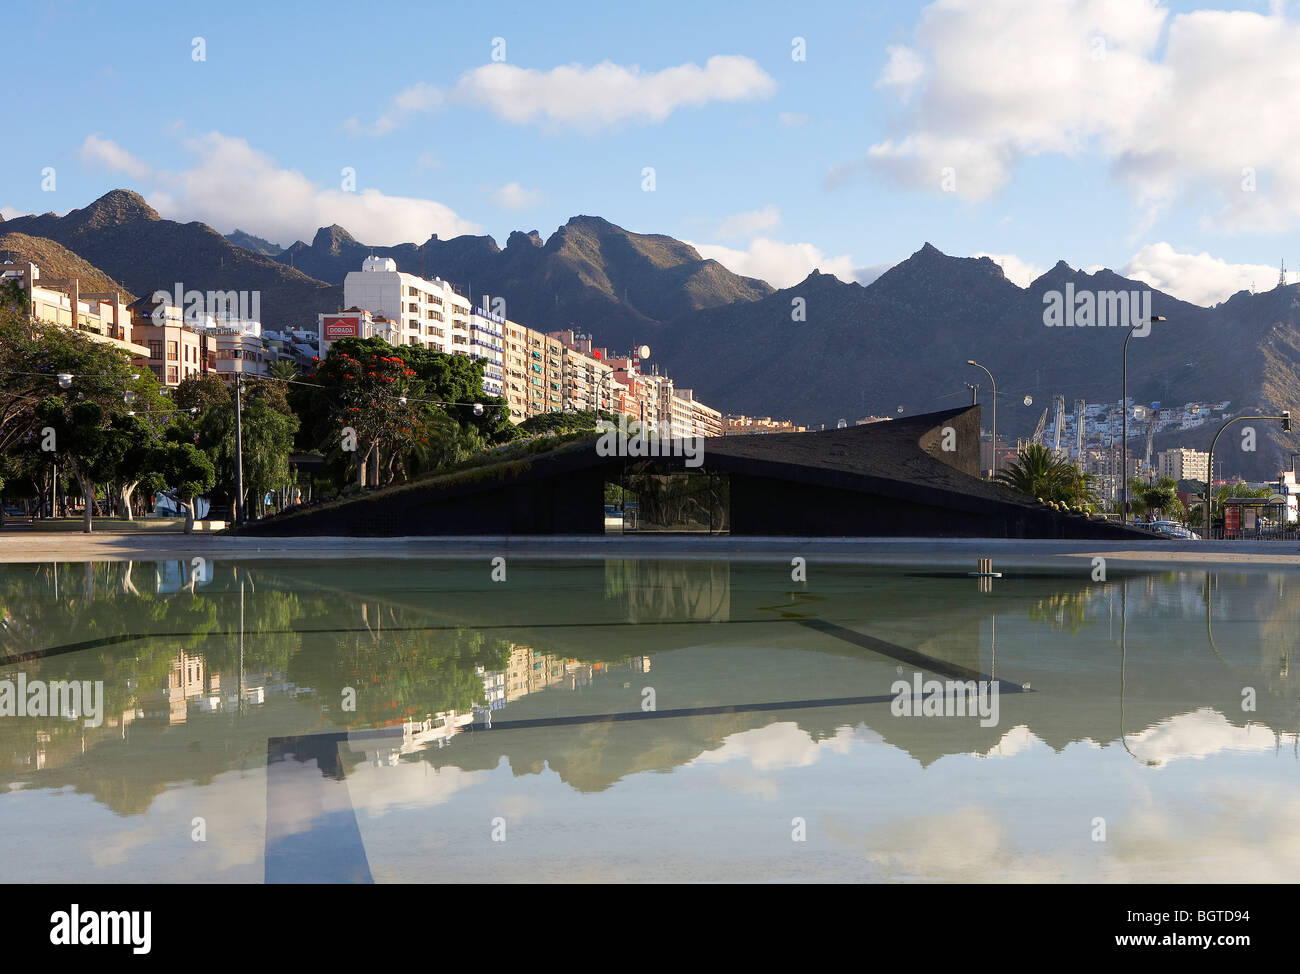 plaza de españa, a general view of the pool and tourist information office with buildings and mountains in the distance Stock Photo